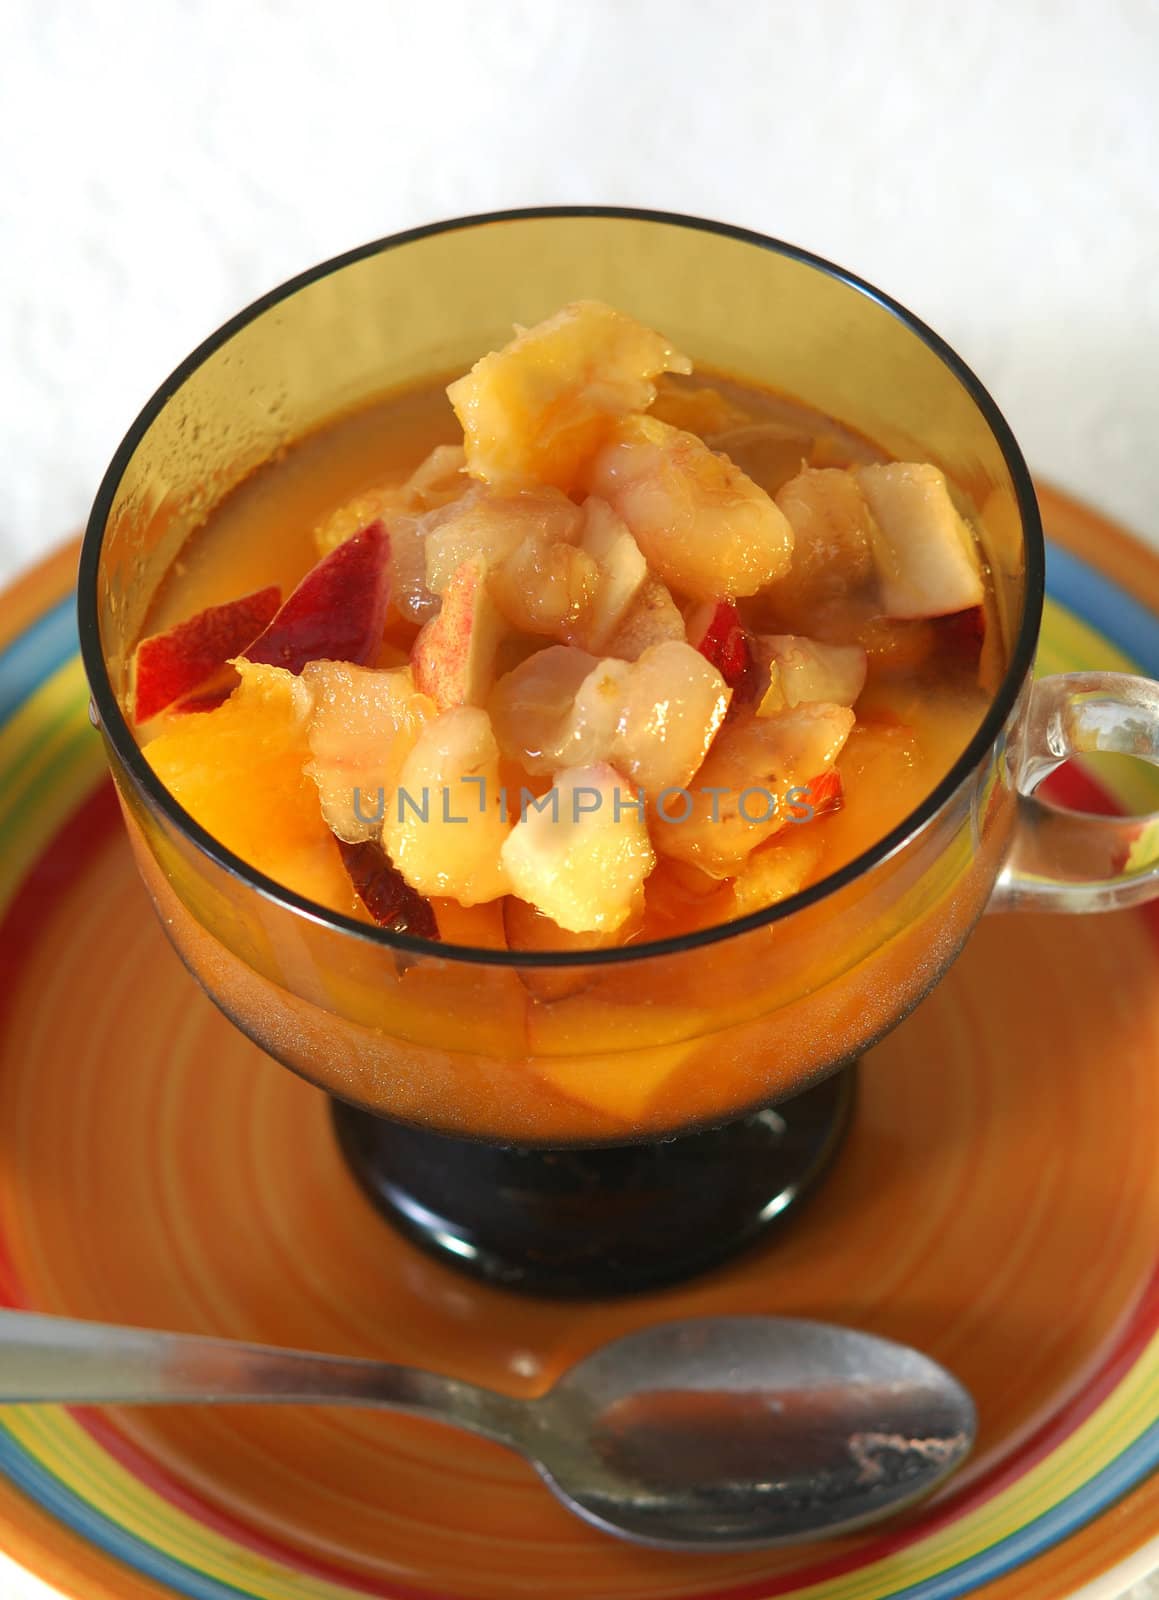 close up of a bowl containing fresh fruit salad and a spoon